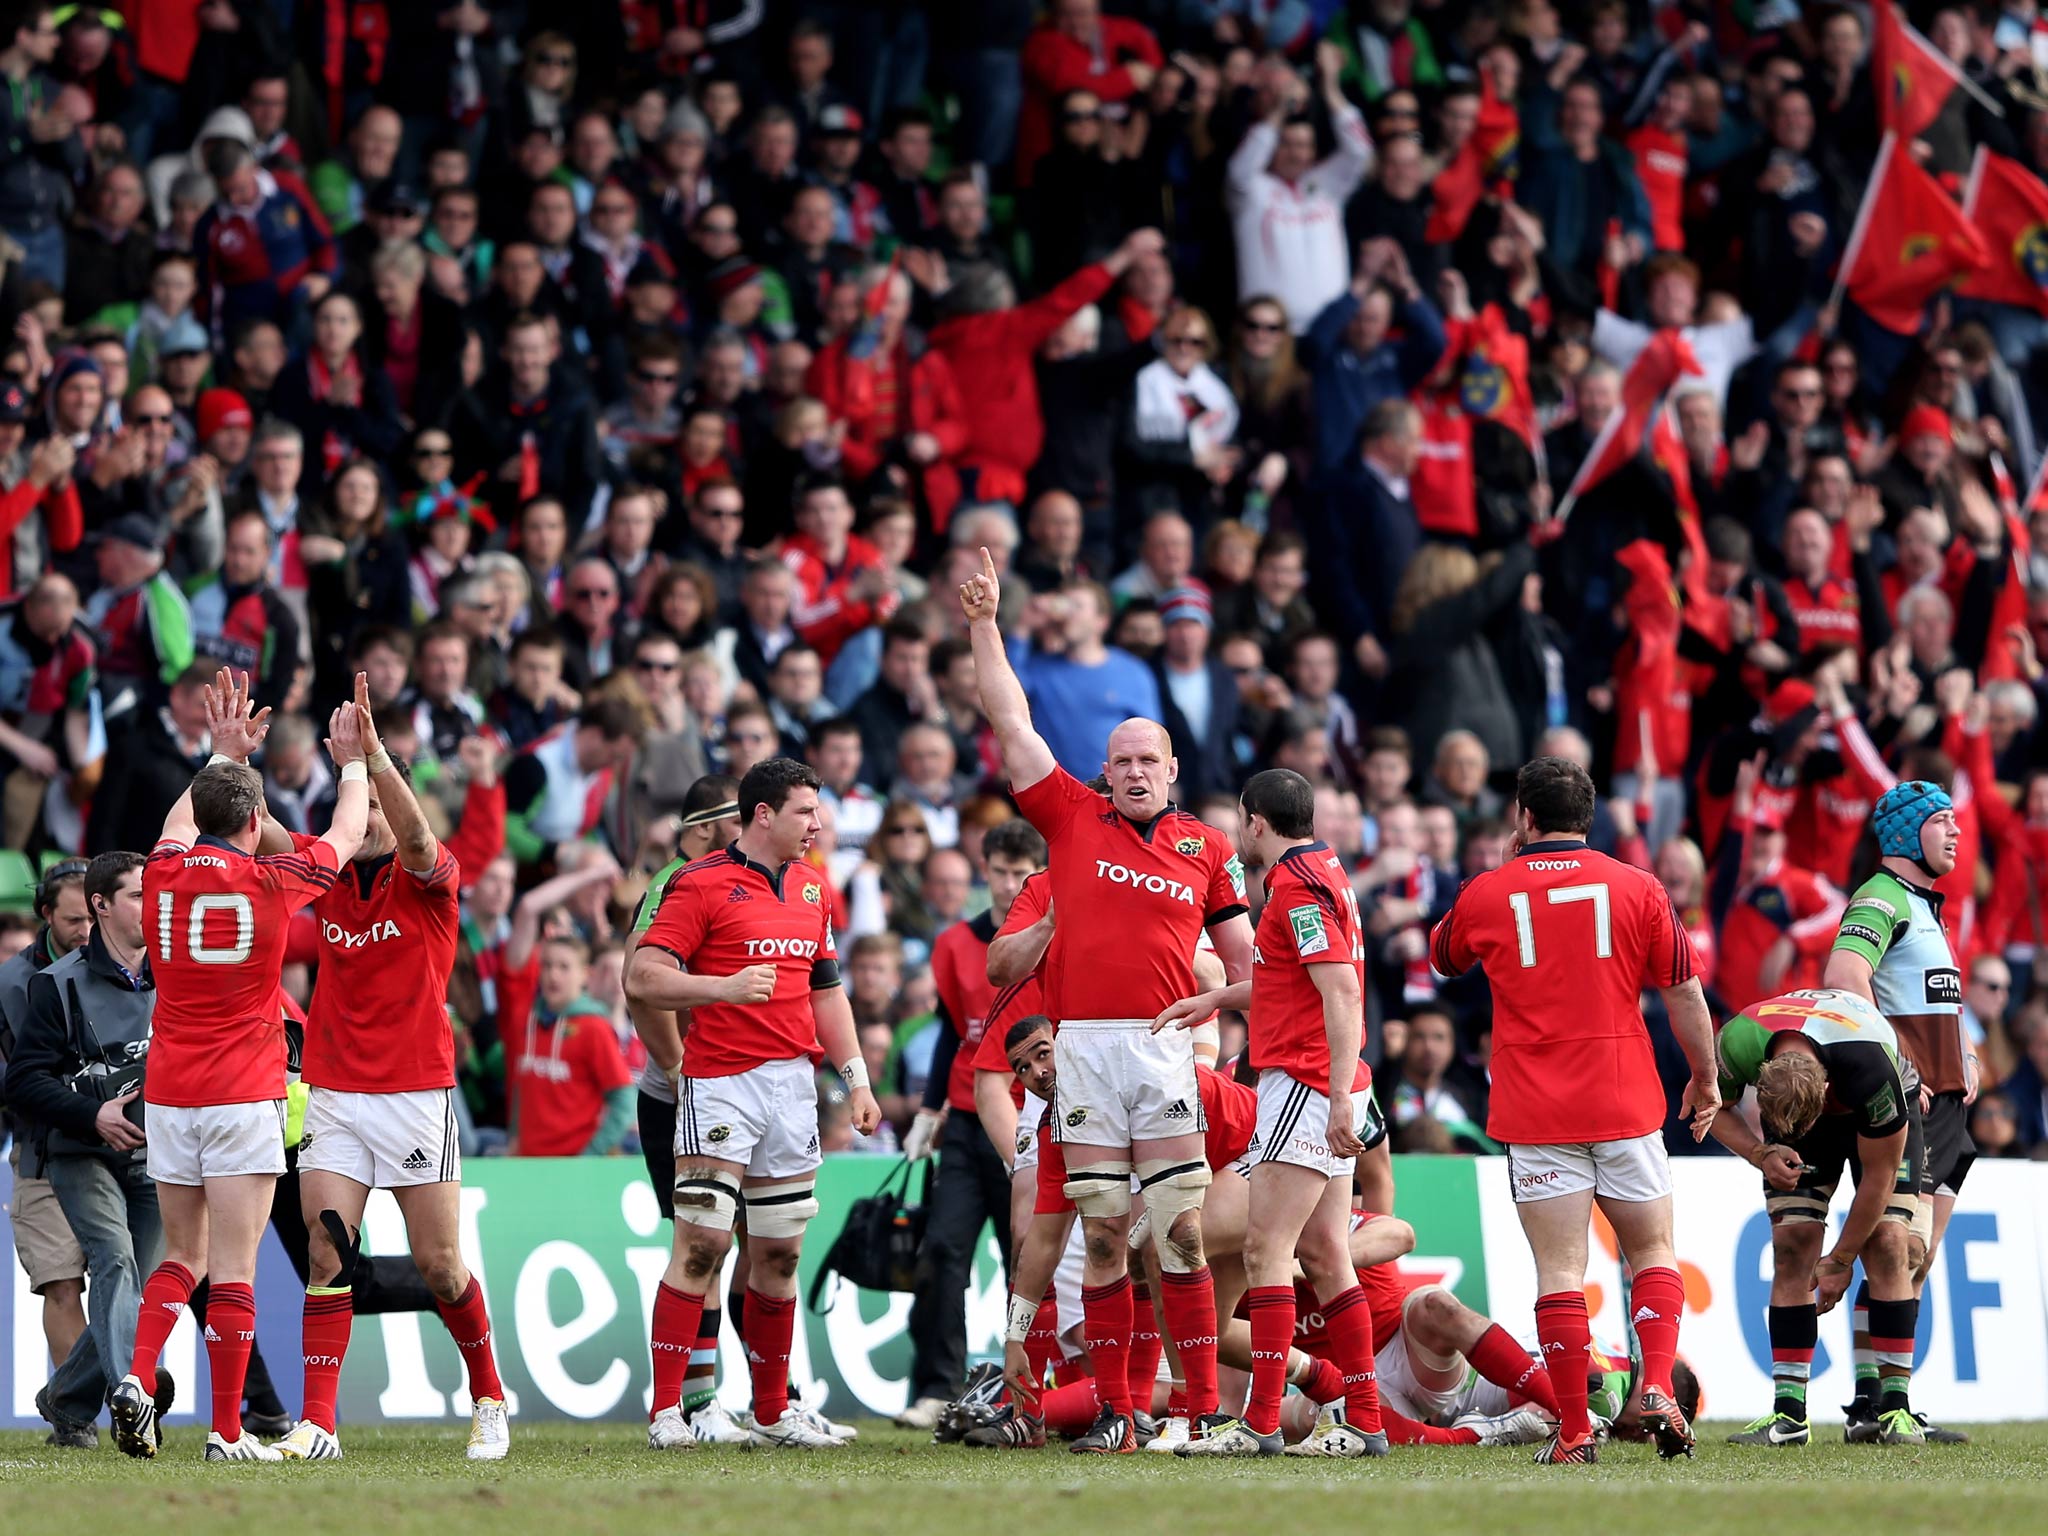 Munster celebrate during their victory over Quins